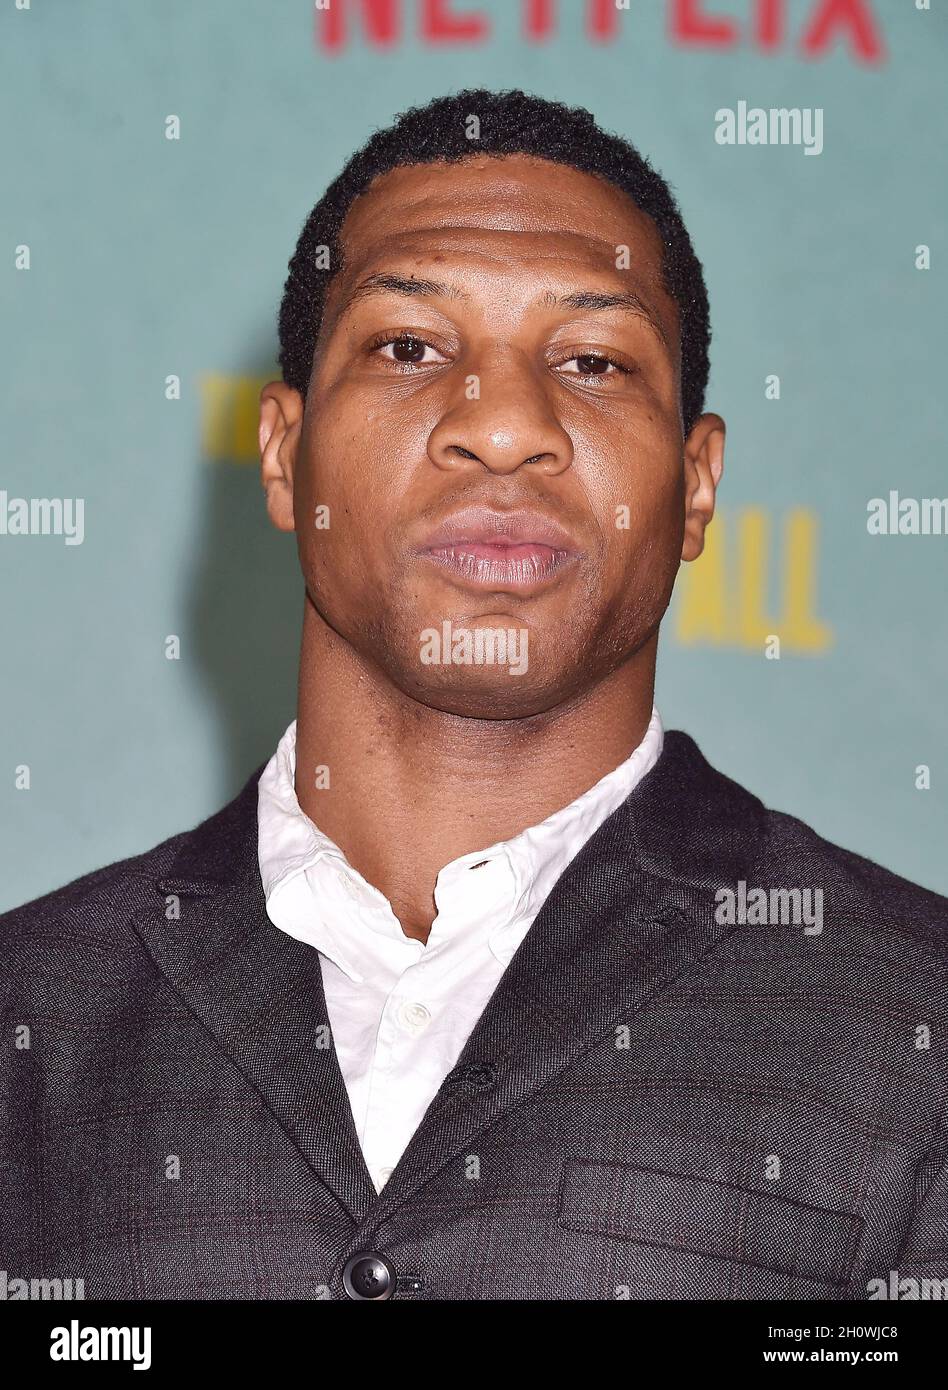 LOS ANGELES, CA - OCTOBER 13: Jonathan Majors attends a special screening of “The Harder They Fall” at the Shrine Auditorium and Expo Hall on October Stock Photo